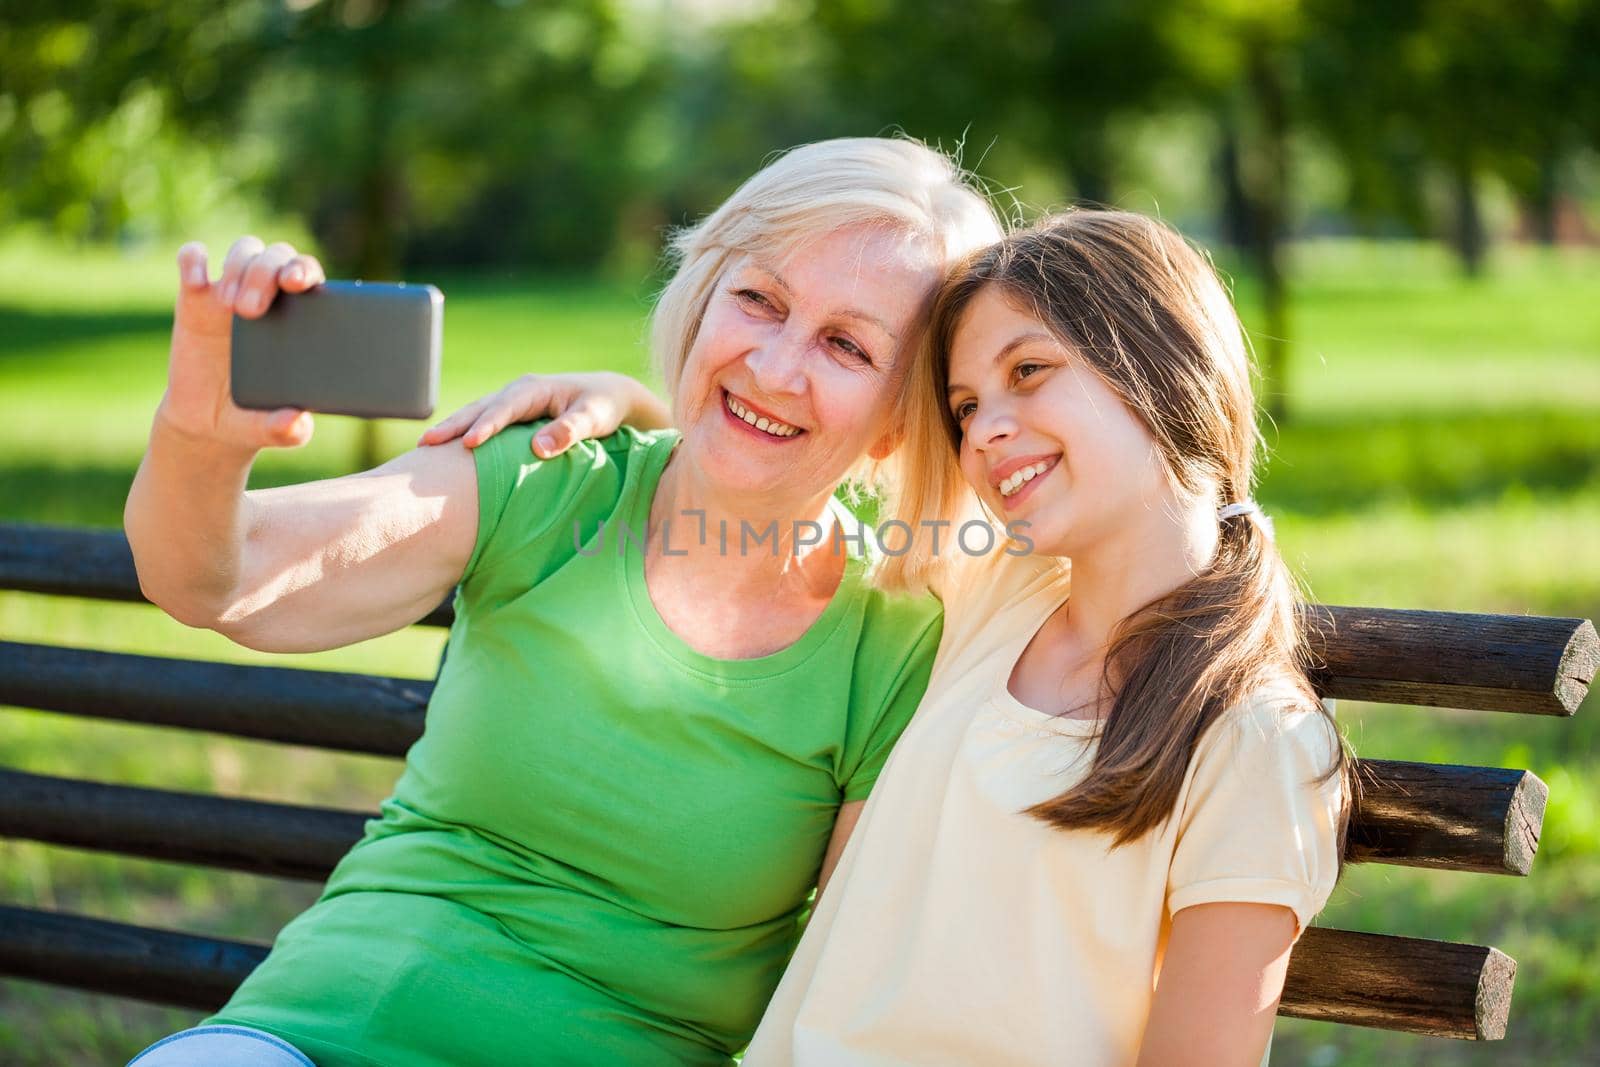 Grandmother and granddaughter are sitting in park and taking selfie.